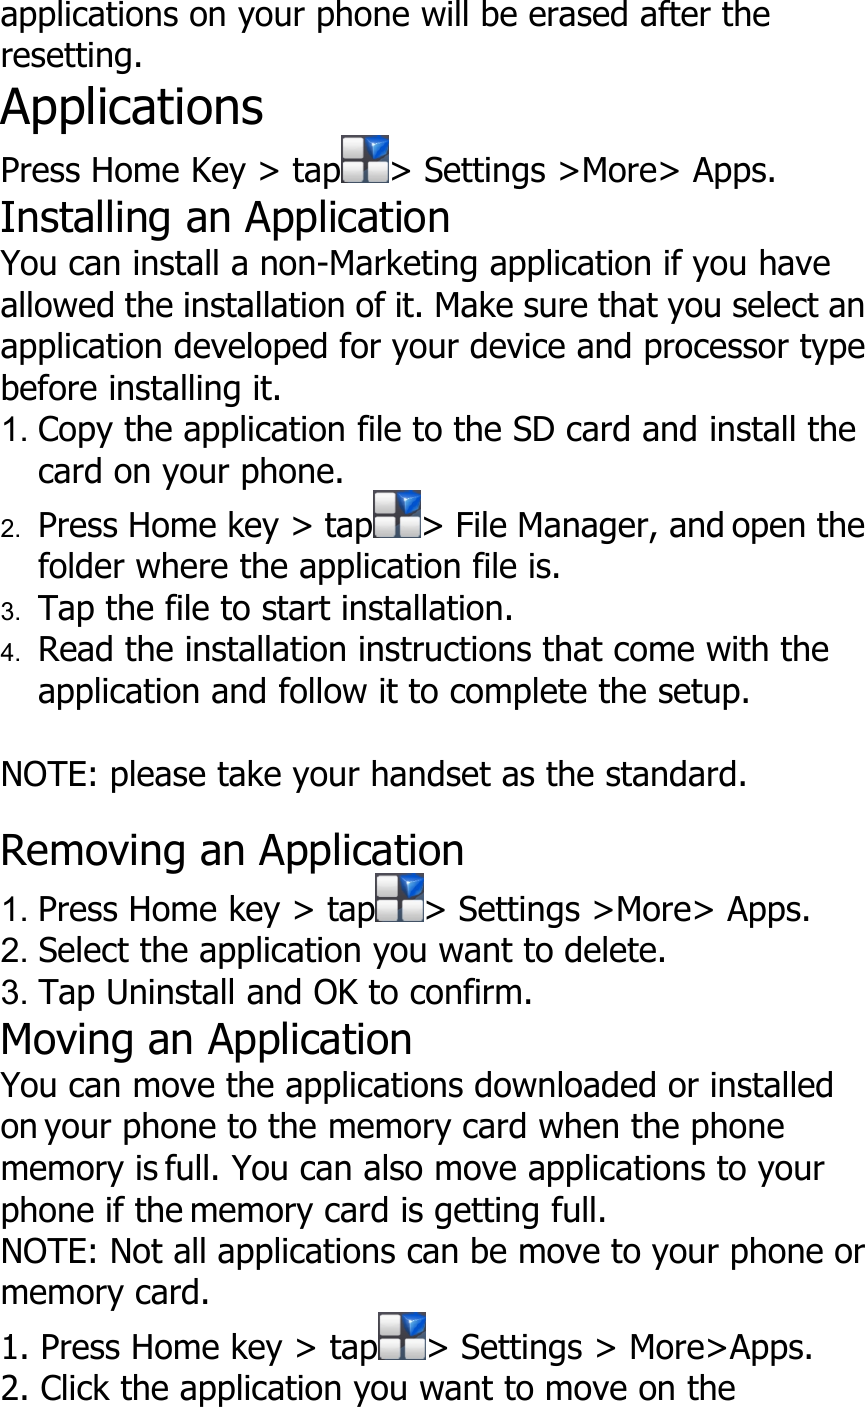 applications on your phone will be erased after theresetting.ApplicationsPress Home Key &gt; tap &gt; Settings &gt;More&gt; Apps.Installing an ApplicationYou can install a non-Marketing application if you haveallowed the installation of it. Make sure that you select anapplication developed for your device and processor typebefore installing it.1. Copy the application file to the SD card and install thecard on your phone.2. Press Home key &gt; tap &gt; File Manager, and open thefolder where the application file is.3. Tap the file to start installation.4. Read the installation instructions that come with theapplication and follow it to complete the setup.NOTE: please take your handset as the standard.Removing an Application1. Press Home key &gt; tap &gt; Settings &gt;More&gt; Apps.2. Select the application you want to delete.3. Tap Uninstall and OK to confirm.Moving an ApplicationYou can move the applications downloaded or installedon your phone to the memory card when the phonememory is full. You can also move applications to yourphone if the memory card is getting full.NOTE: Not all applications can be move to your phone ormemory card.1. Press Home key &gt; tap &gt; Settings &gt; More&gt;Apps.2. Click the application you want to move on the